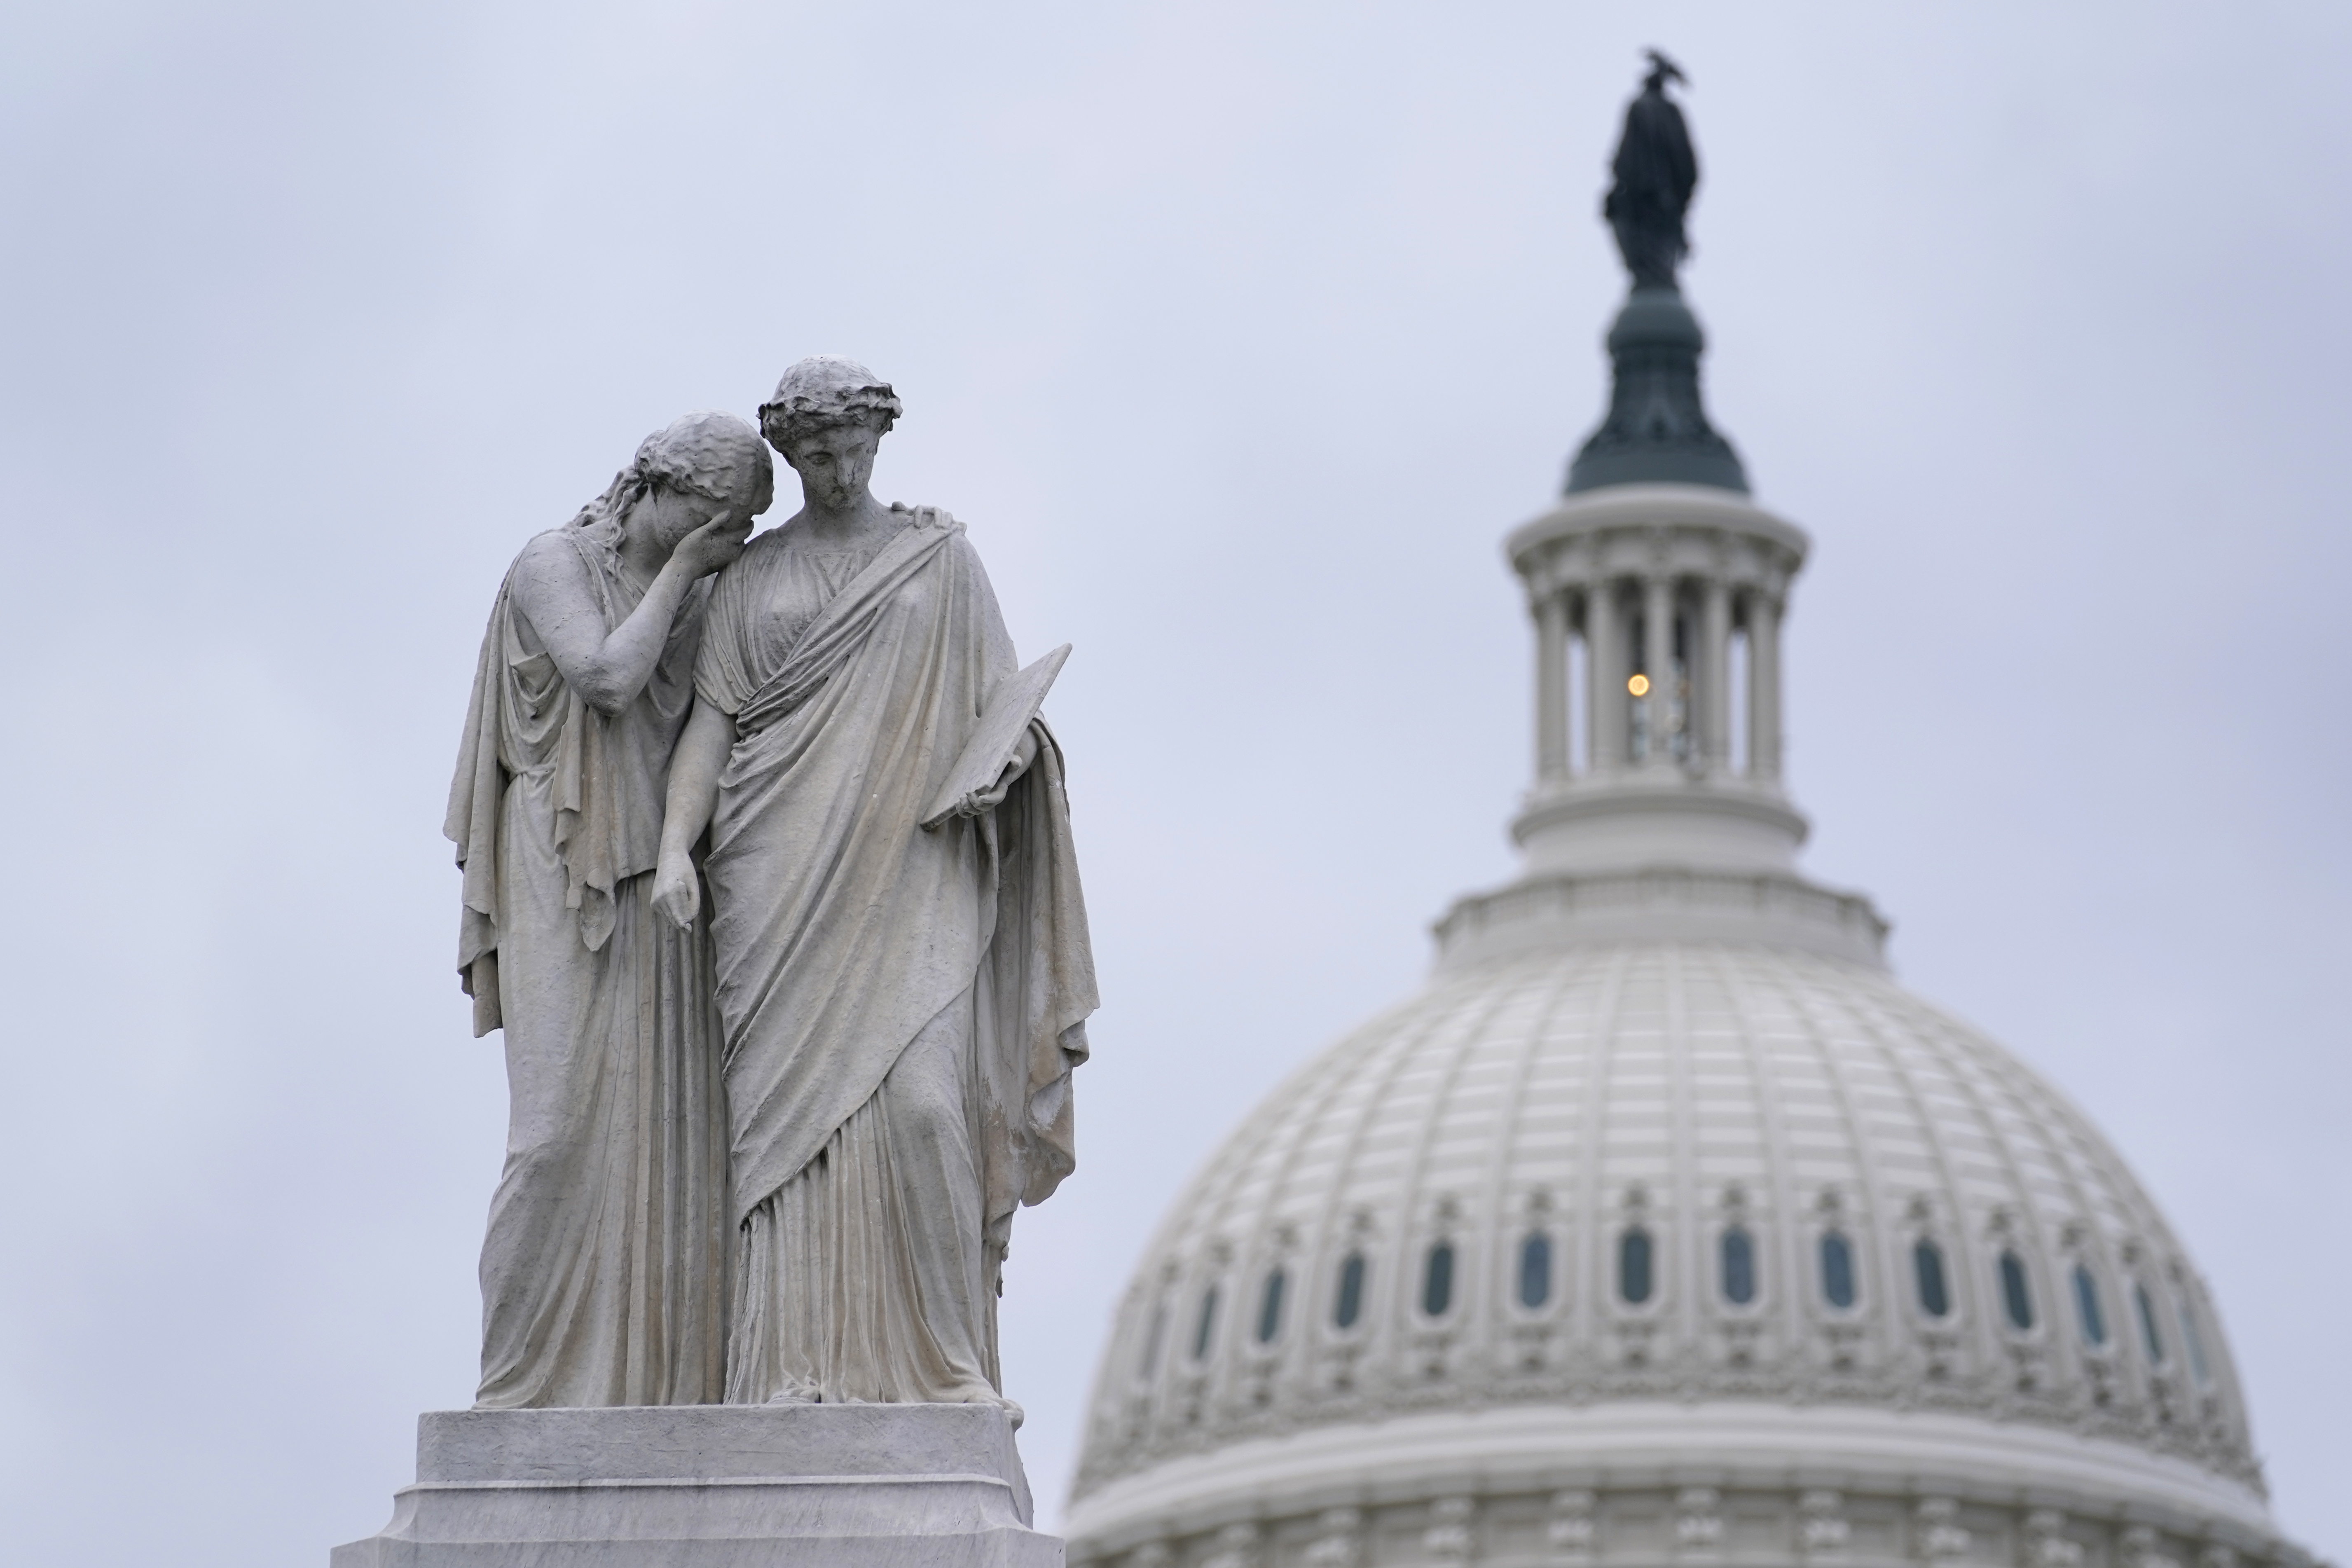 The Peace Monument, also known as the Naval Monument or Civil War Sailors Monument, is framed by the Capitol dome on Capitol Hill in Washington, Monday, Jan. 4, 2021. Wednesdayu2019s congressional joint session to count electoral votes could drag late into the night as some Republicans plan to challenge Democrat Joe Bidenu2019s victory in at least six states.  Photo: AP